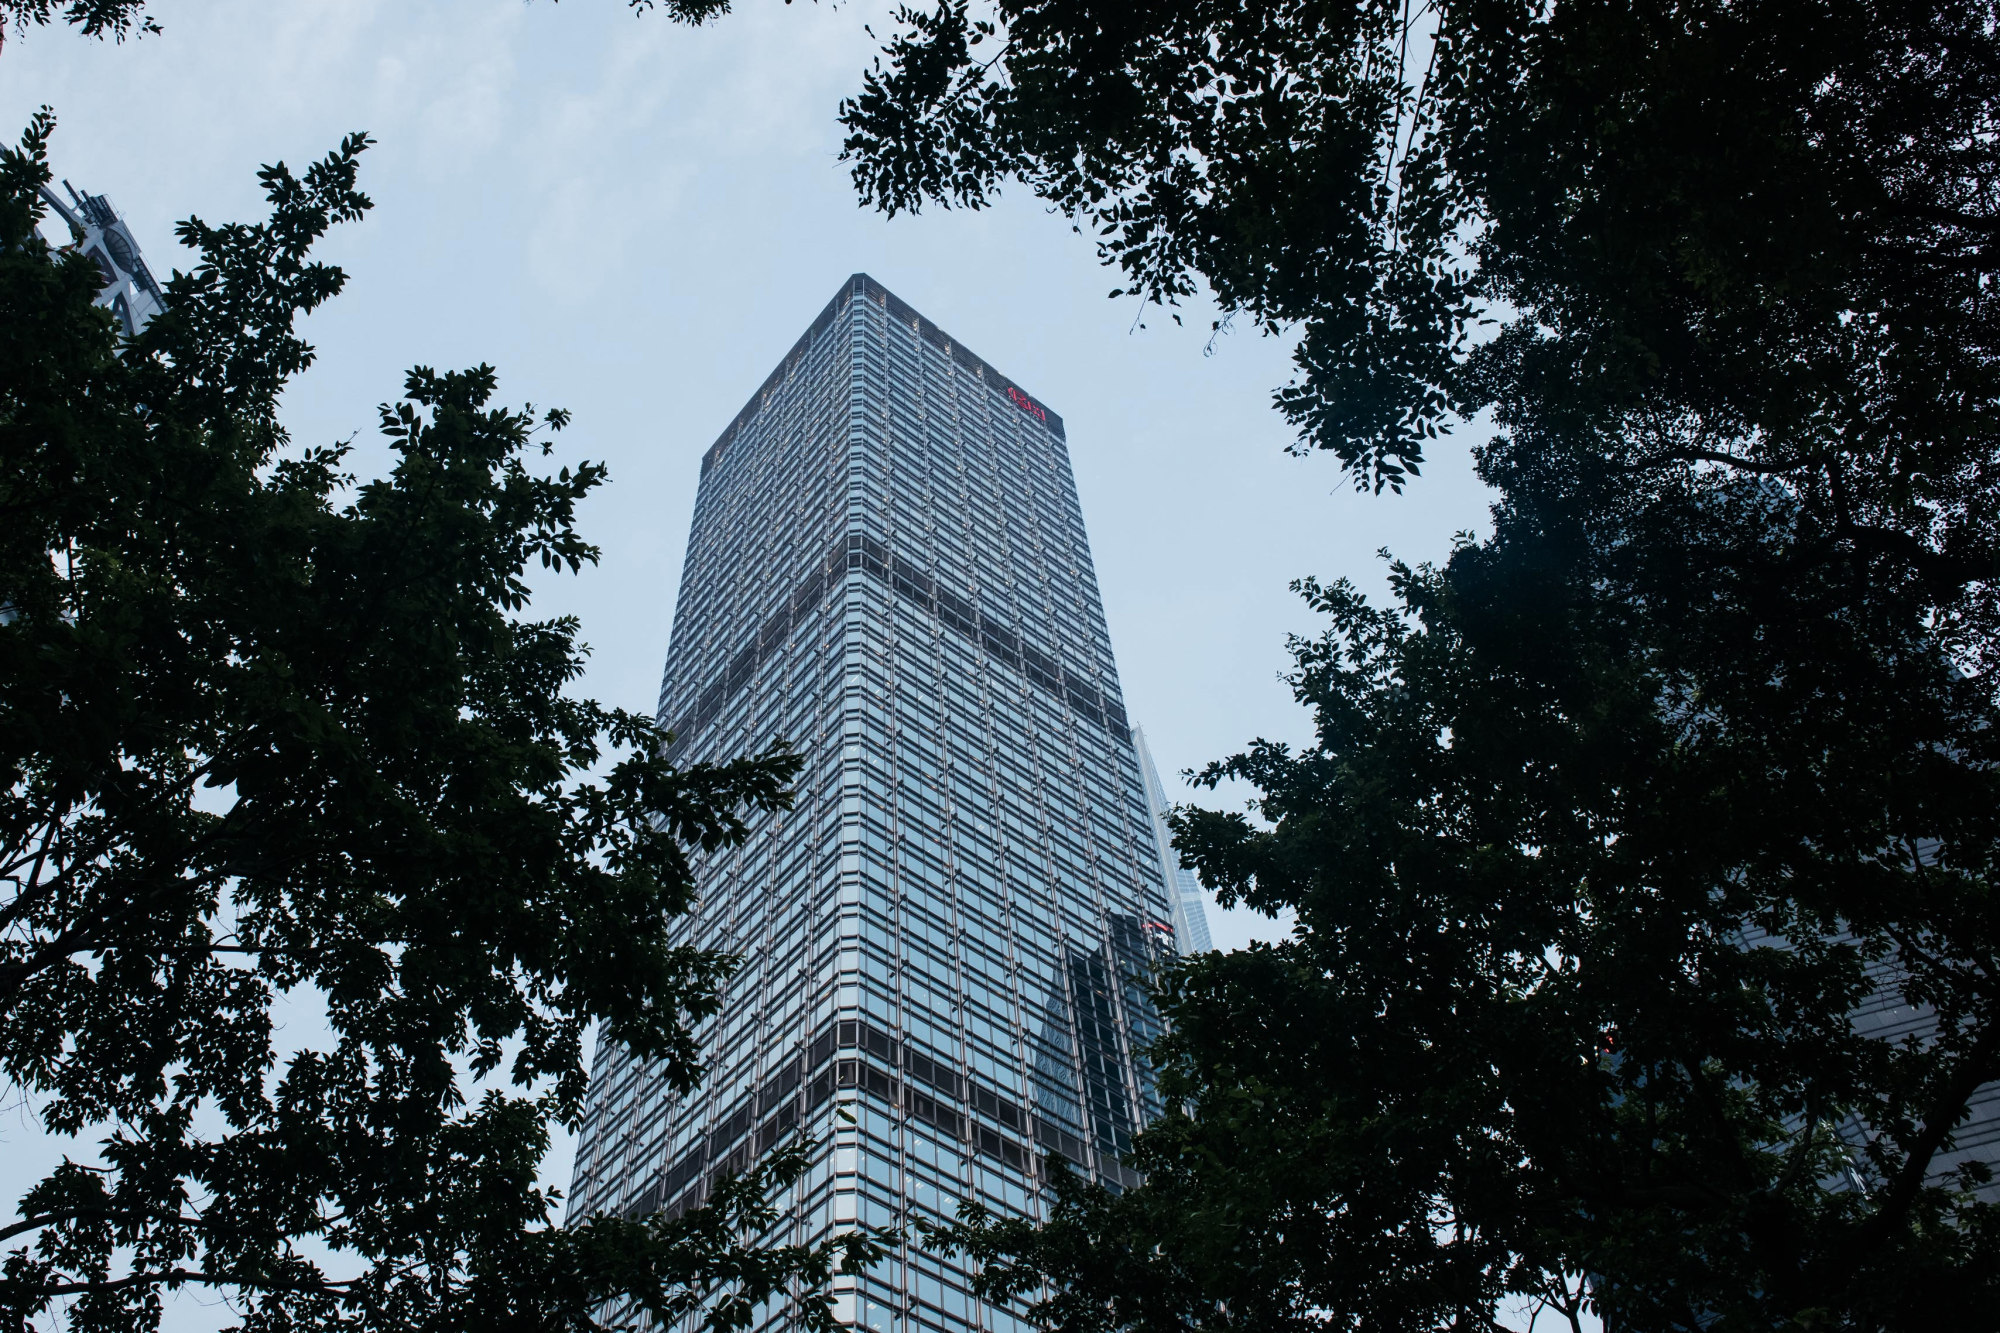 Hong Kong Real Estate: Why City's Office Towers Are So Empty - Bloomberg